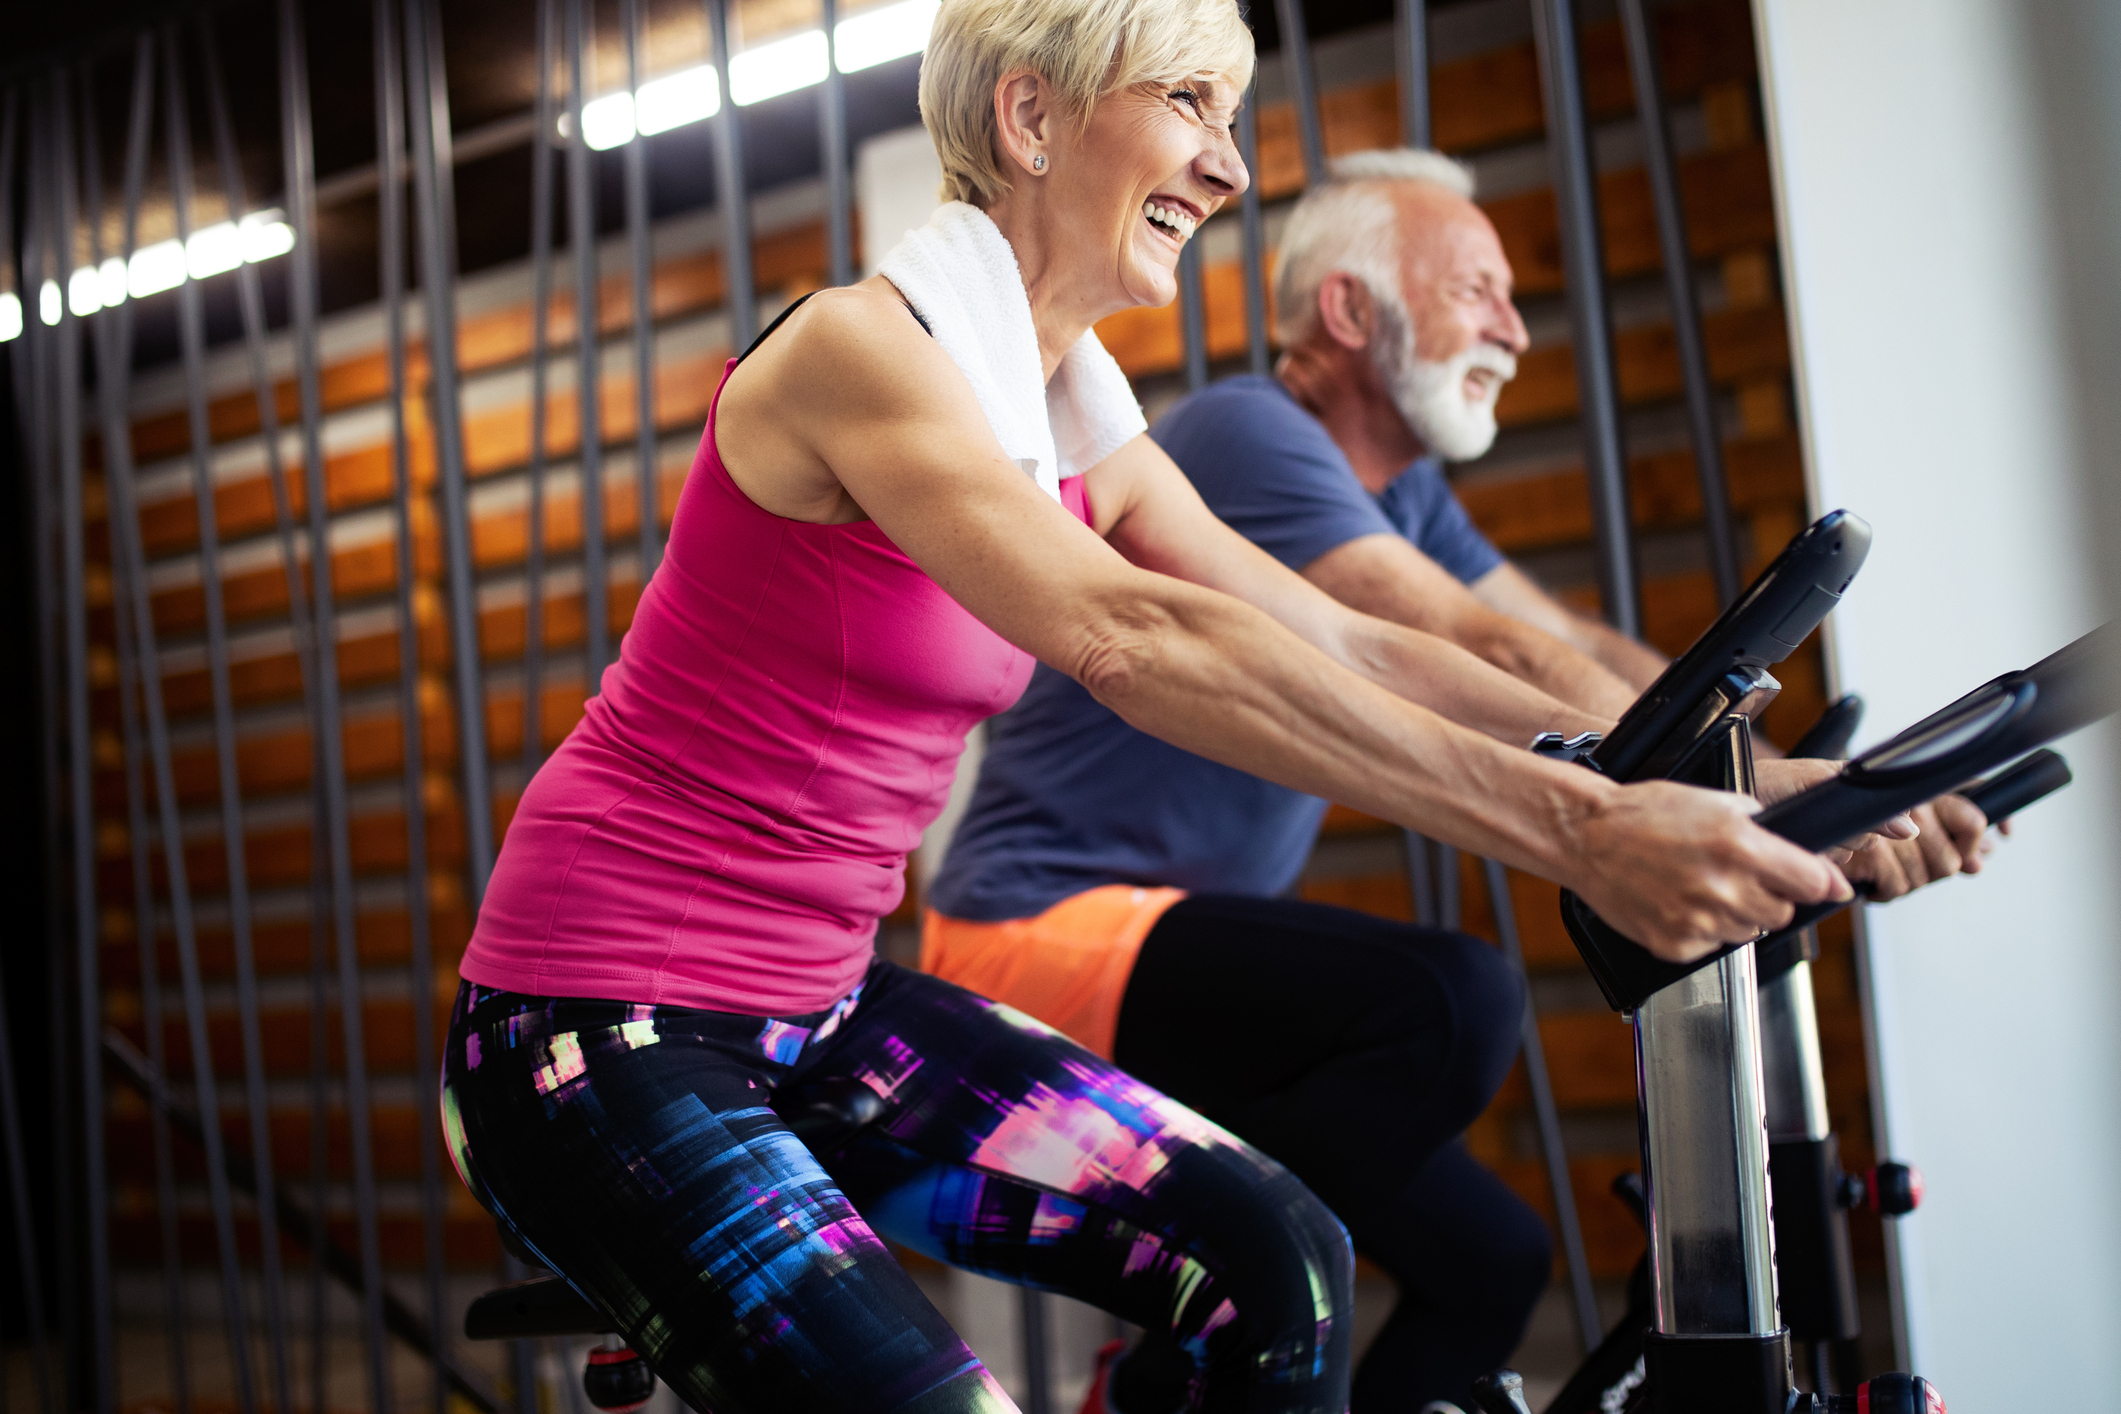 The truth about exercise and dying early